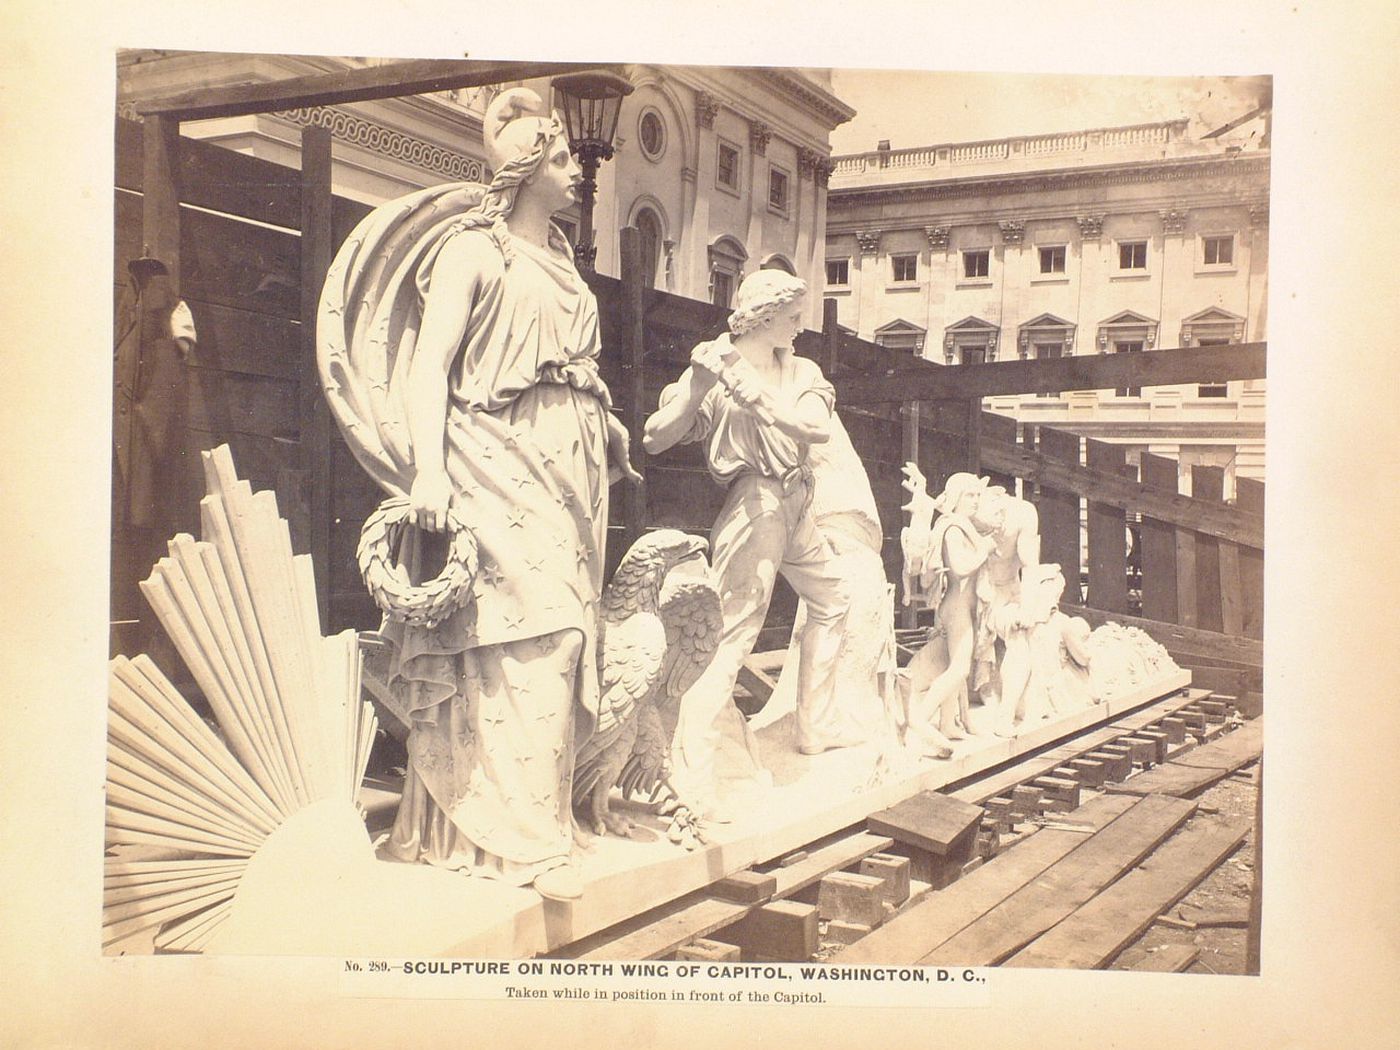 Sculpture for north wing of Capitol ready for installation, Washington, District of Columbia